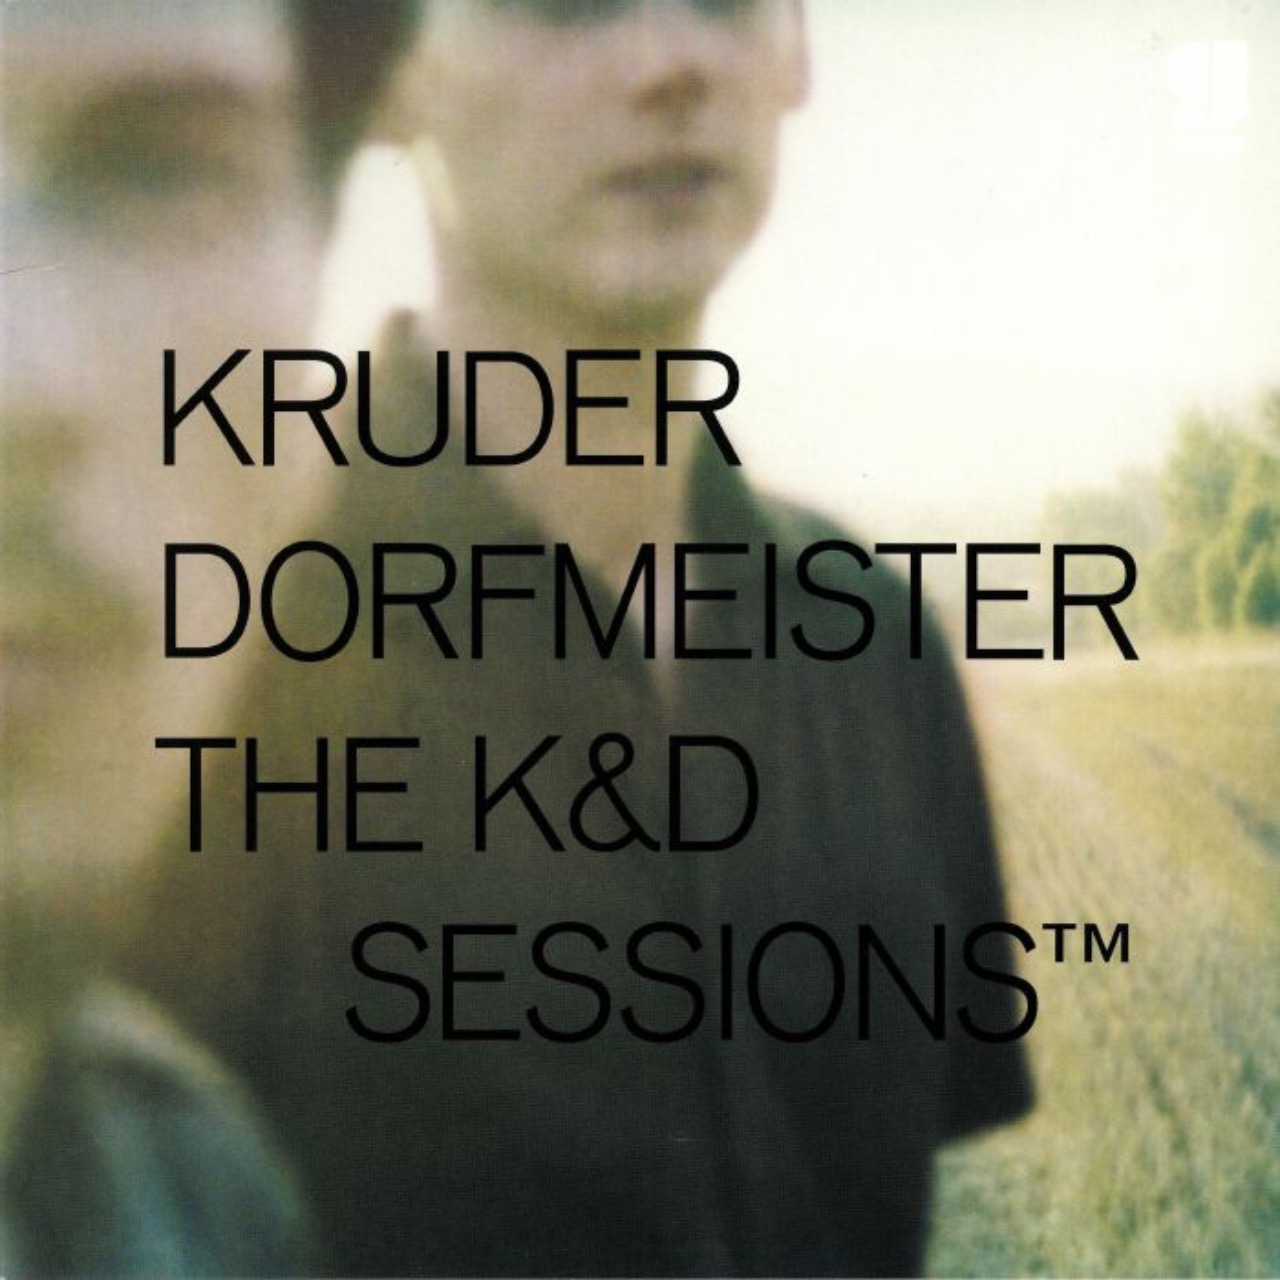 The K&amp;D Sessions™